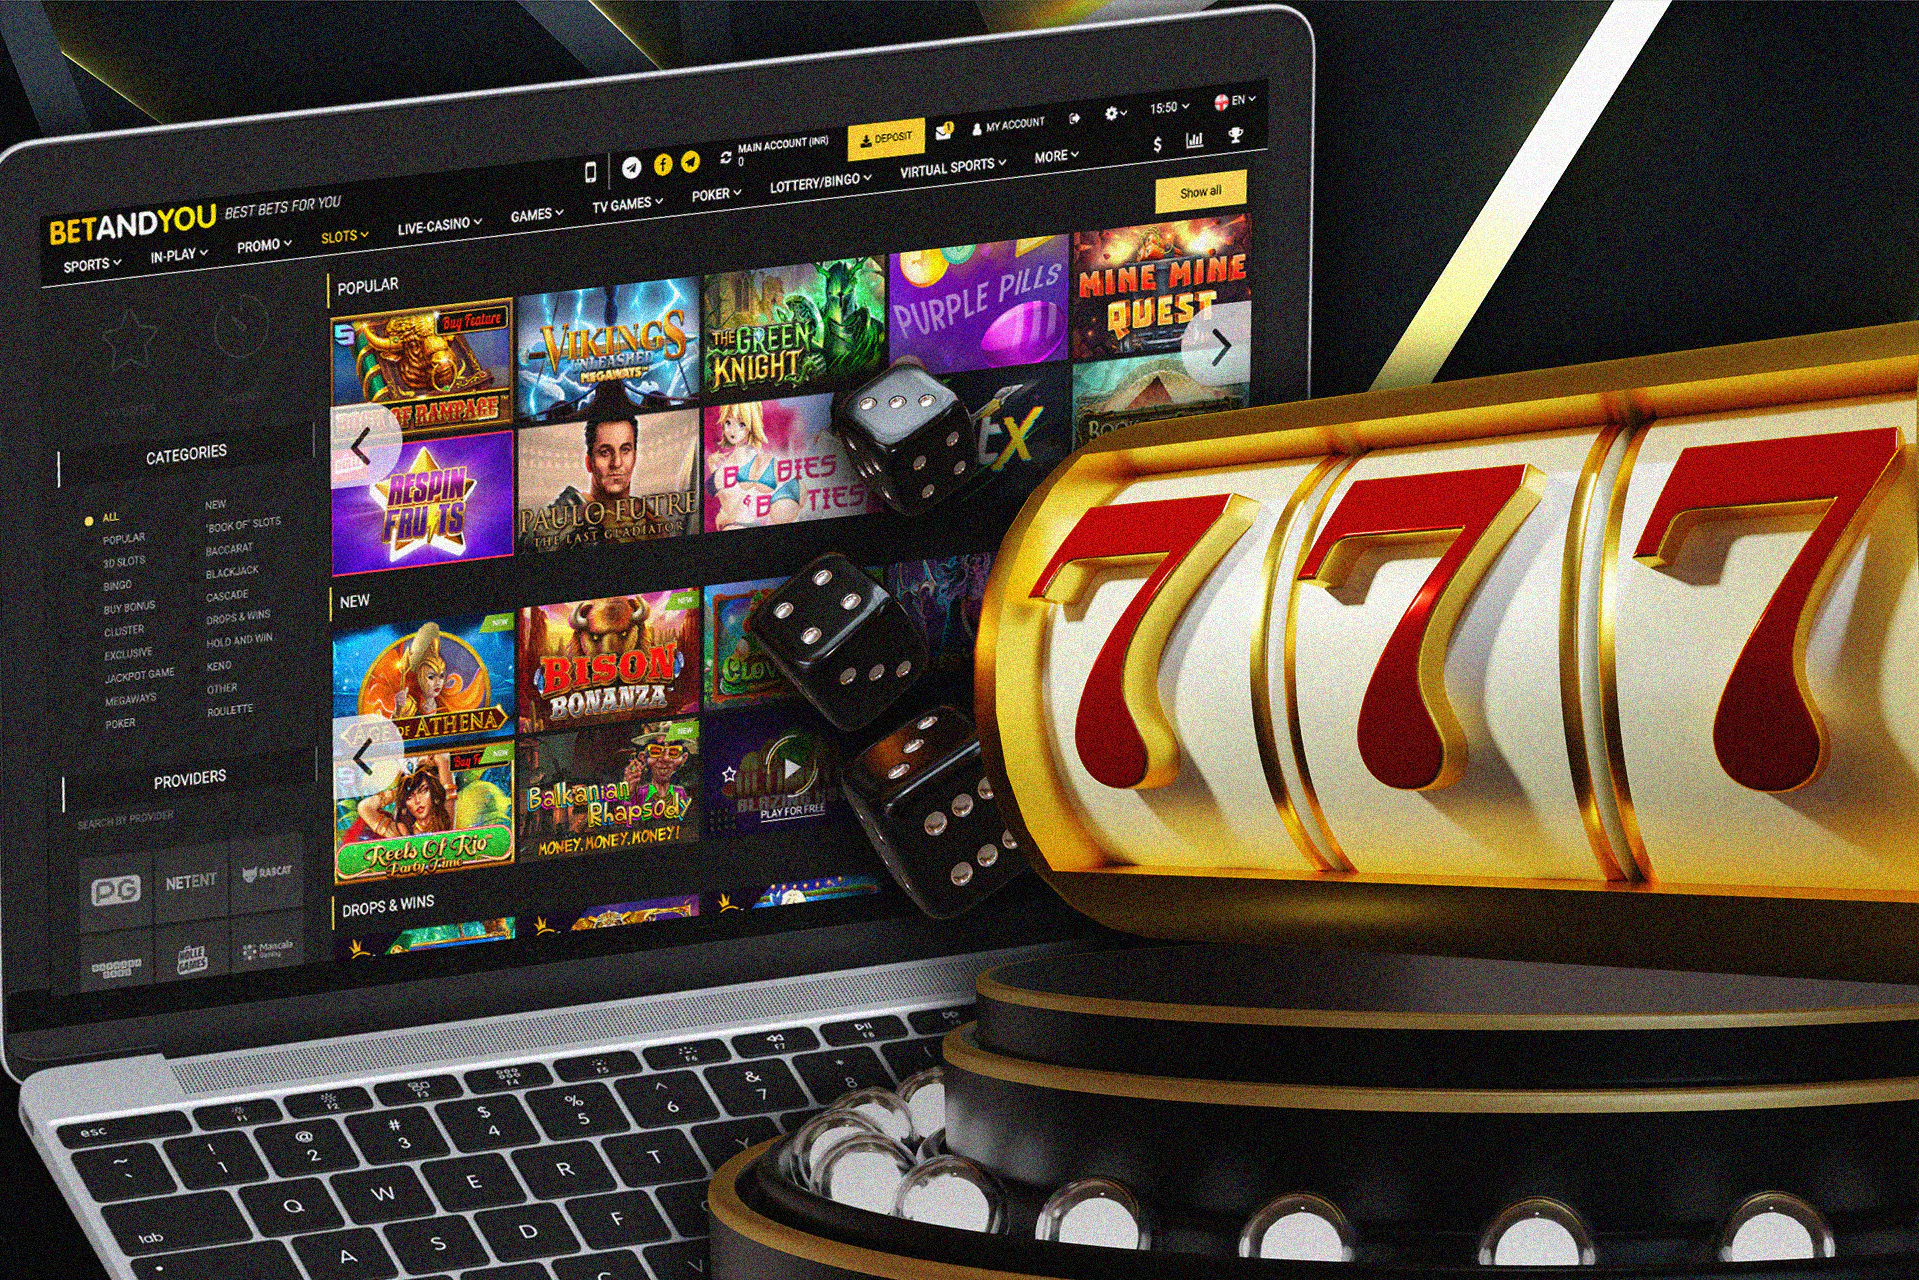 Play slots from the well-known providers at Betandyou.